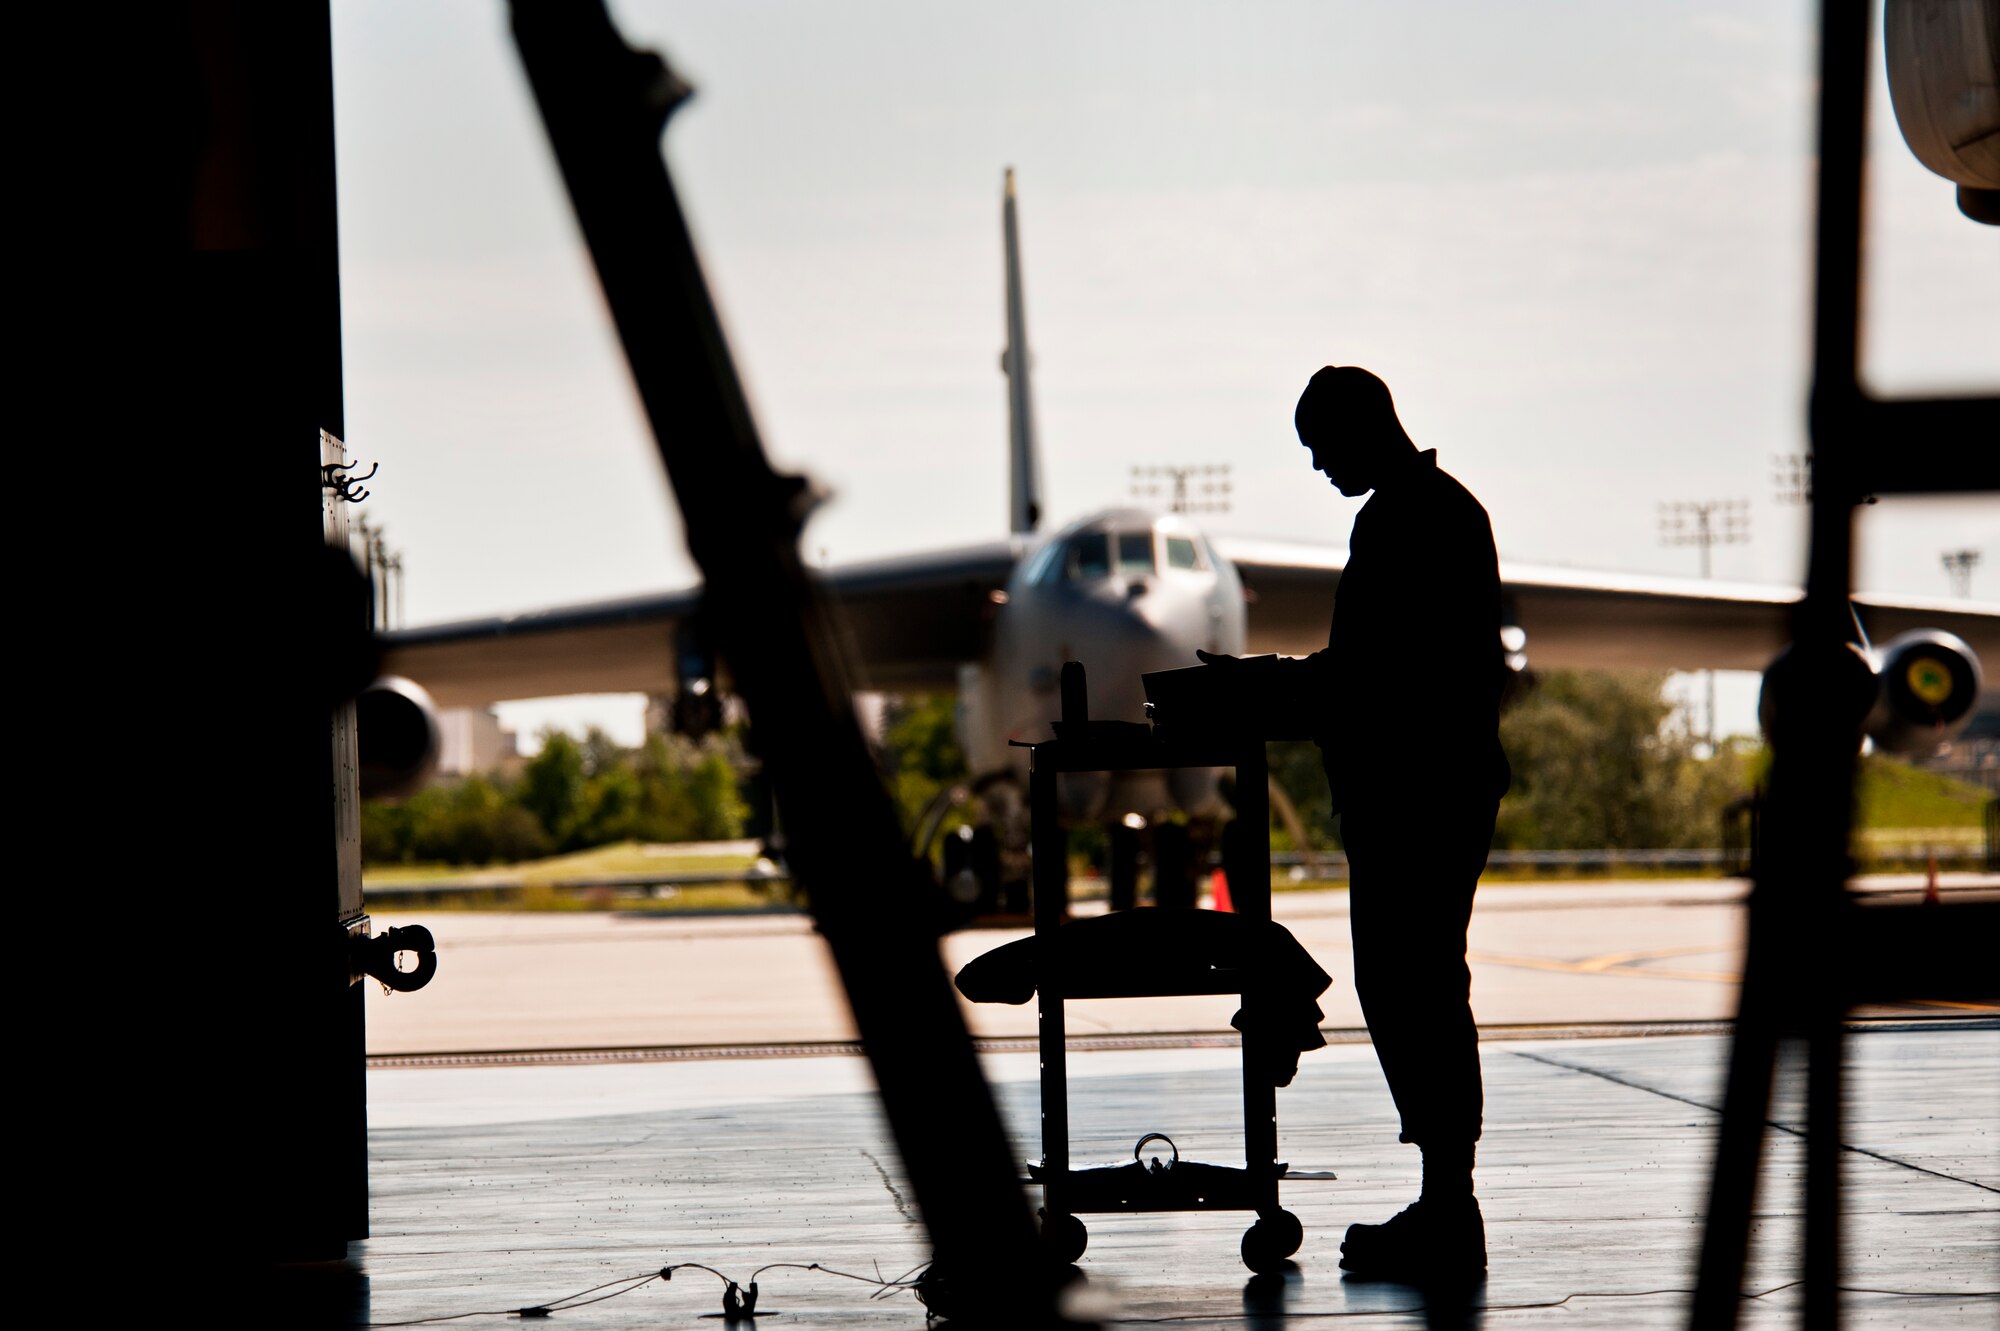 Master Sgt. Iickyra Jones, 5th Aircraft Maintenance Squadron load standardization crew chief, looks at a binder on Minot Air Force Base, N.D., Sept. 5, 2014 during a weapons load. The load crew is evaluated on how quickly they load munitions on a B-52H Stratofortress and how many discrepancies are found. (U.S. Air Force photo/Senior Airman Brittany Y. Bateman)